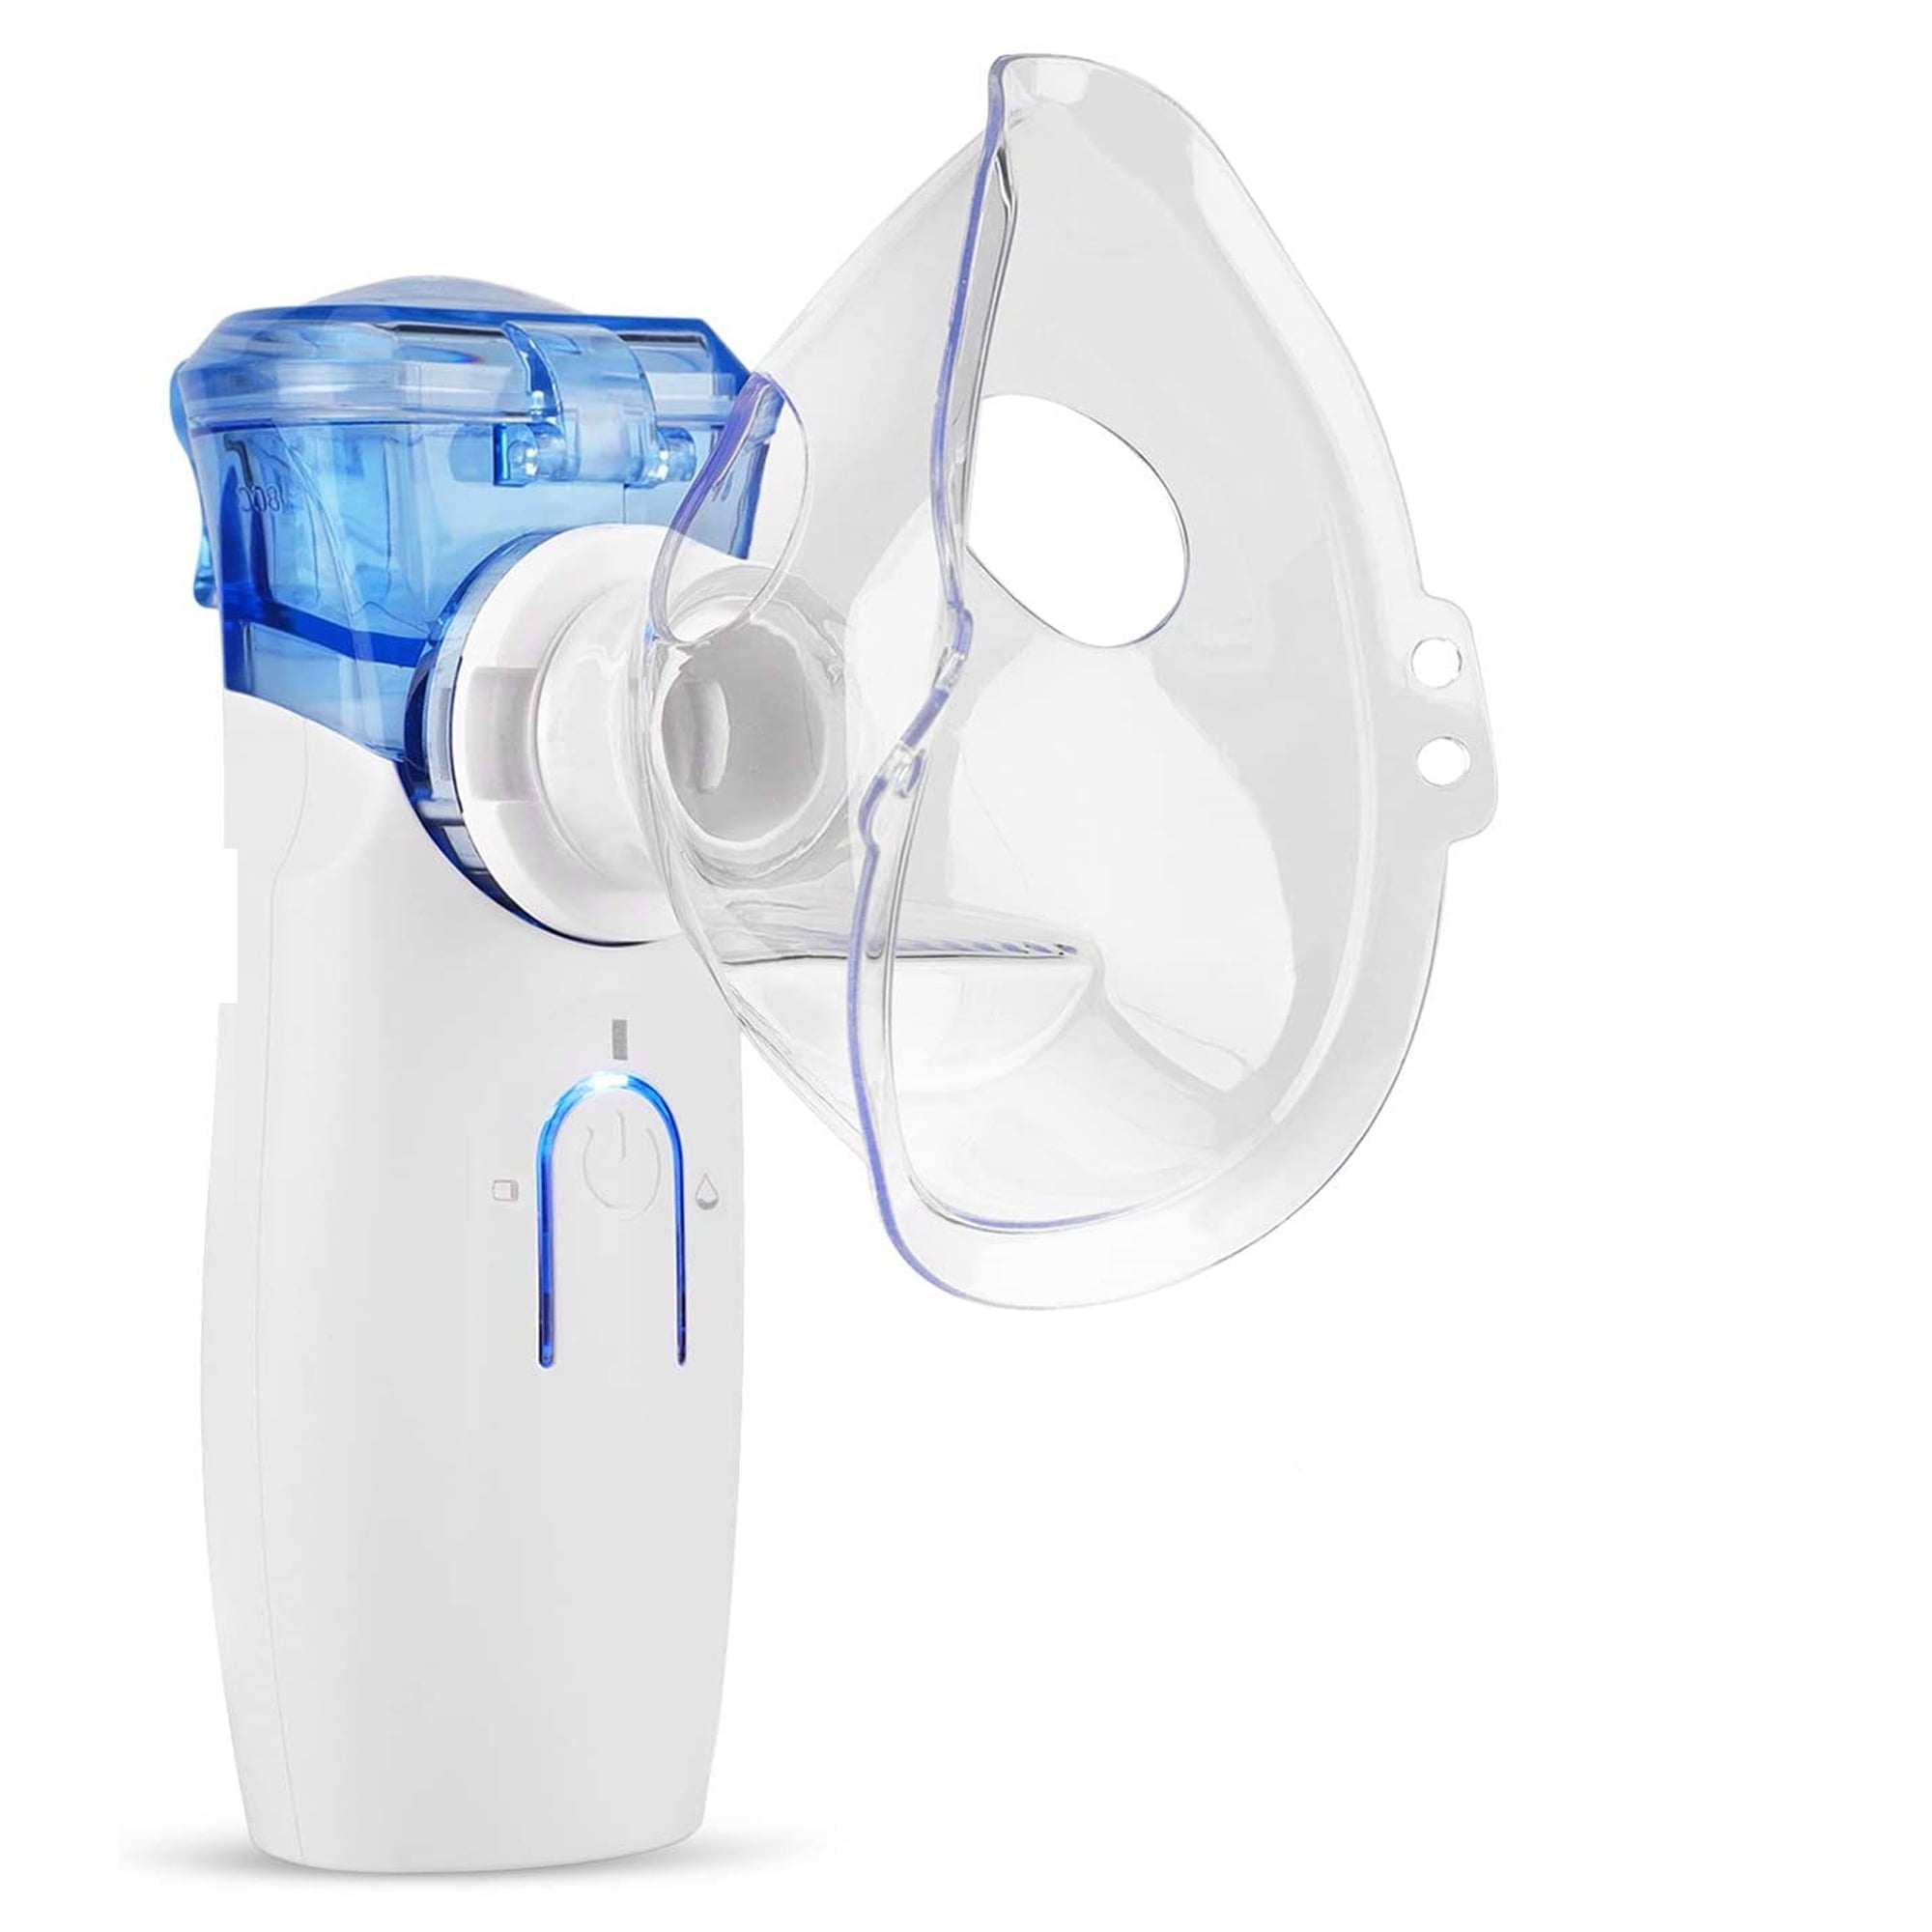 Produktion sofa præmedicinering Portable Nebulize Machine for Adults with Mouthpiece, Kids and Adults Mask  Asthma Inhalers with Auto Clean Mode for Travel and Home Usage - Walmart.com